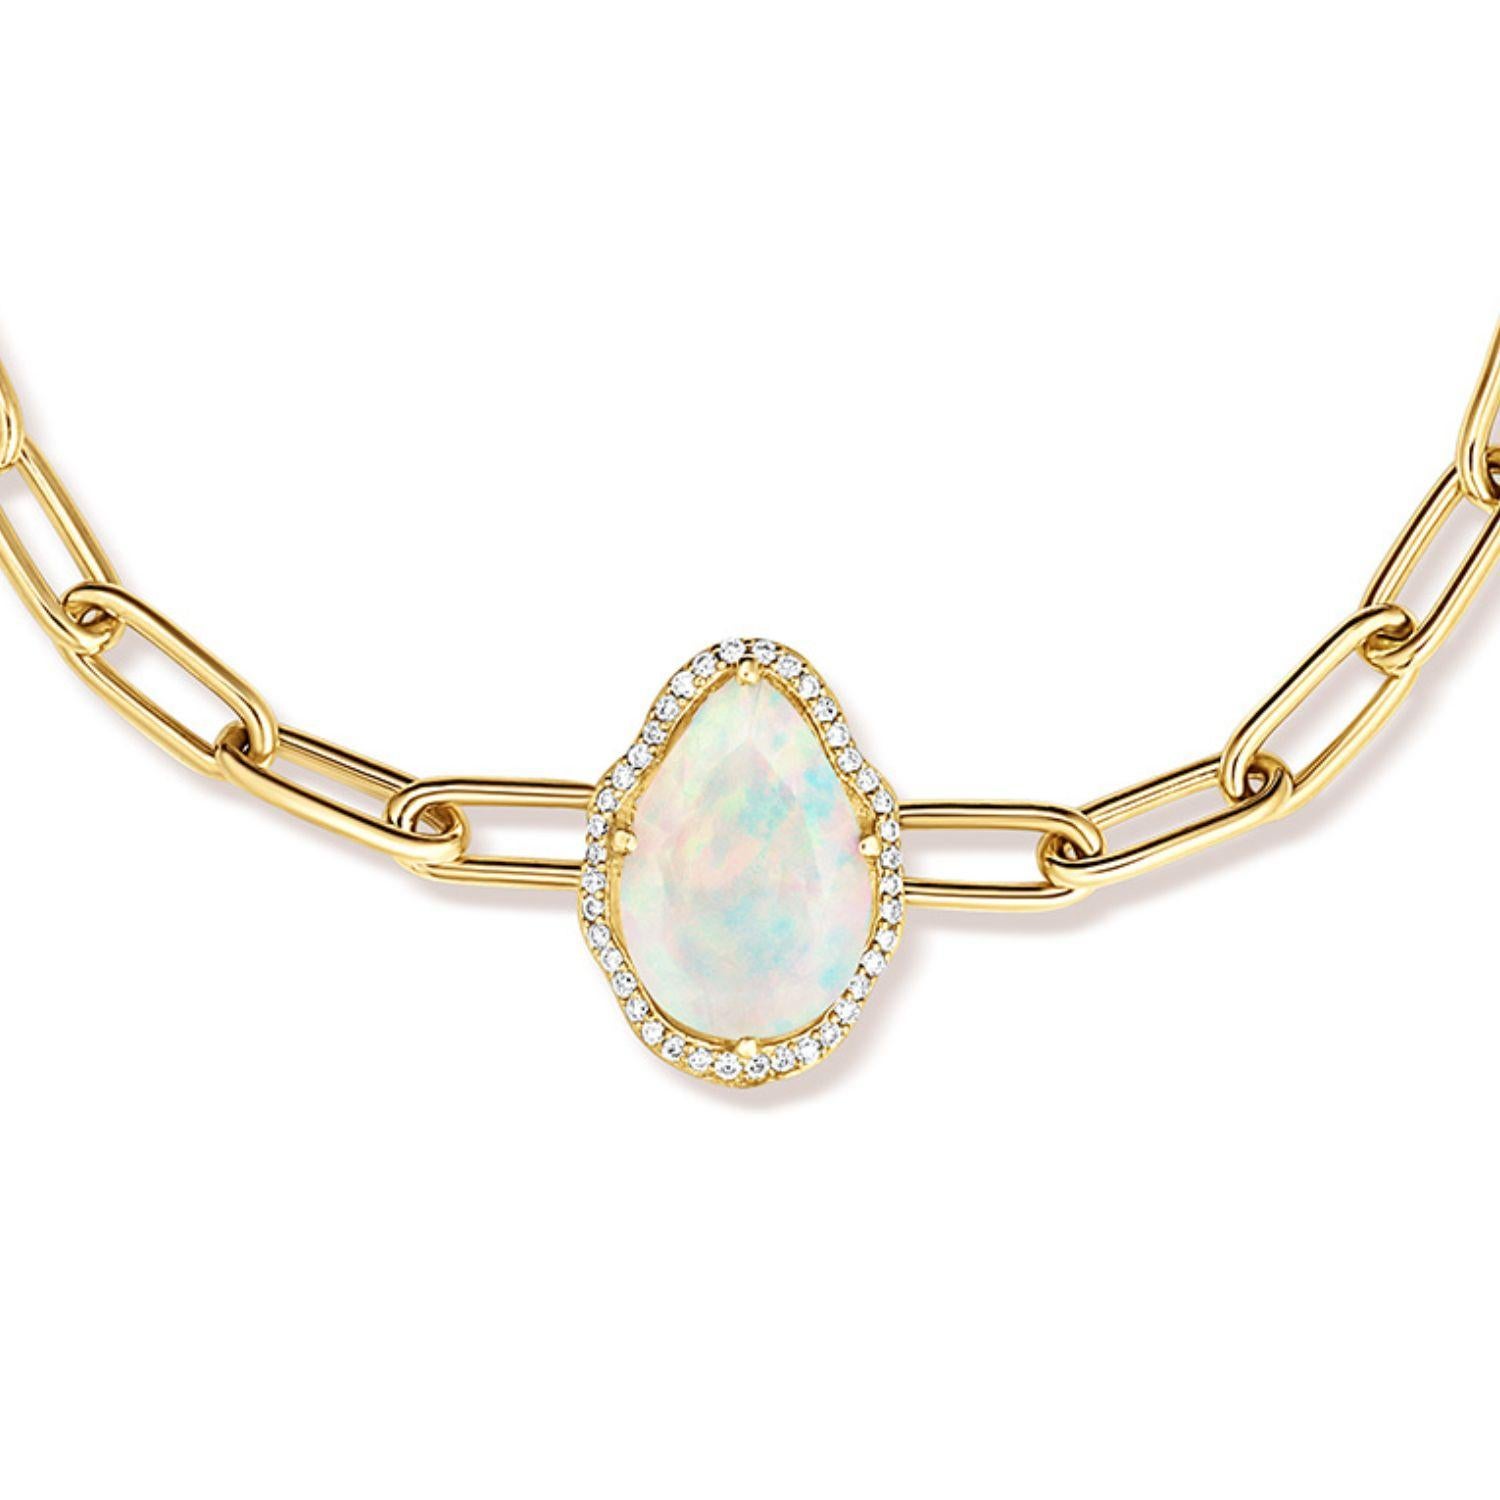 Glow Bracelet. 18K yellow gold (750/1000), with a 2.18 carat pear-cut Ethiopian opal and 0.1 carats of round brilliant-cut diamonds. 18K yellow gold chain with adjustable length of 17 cm.